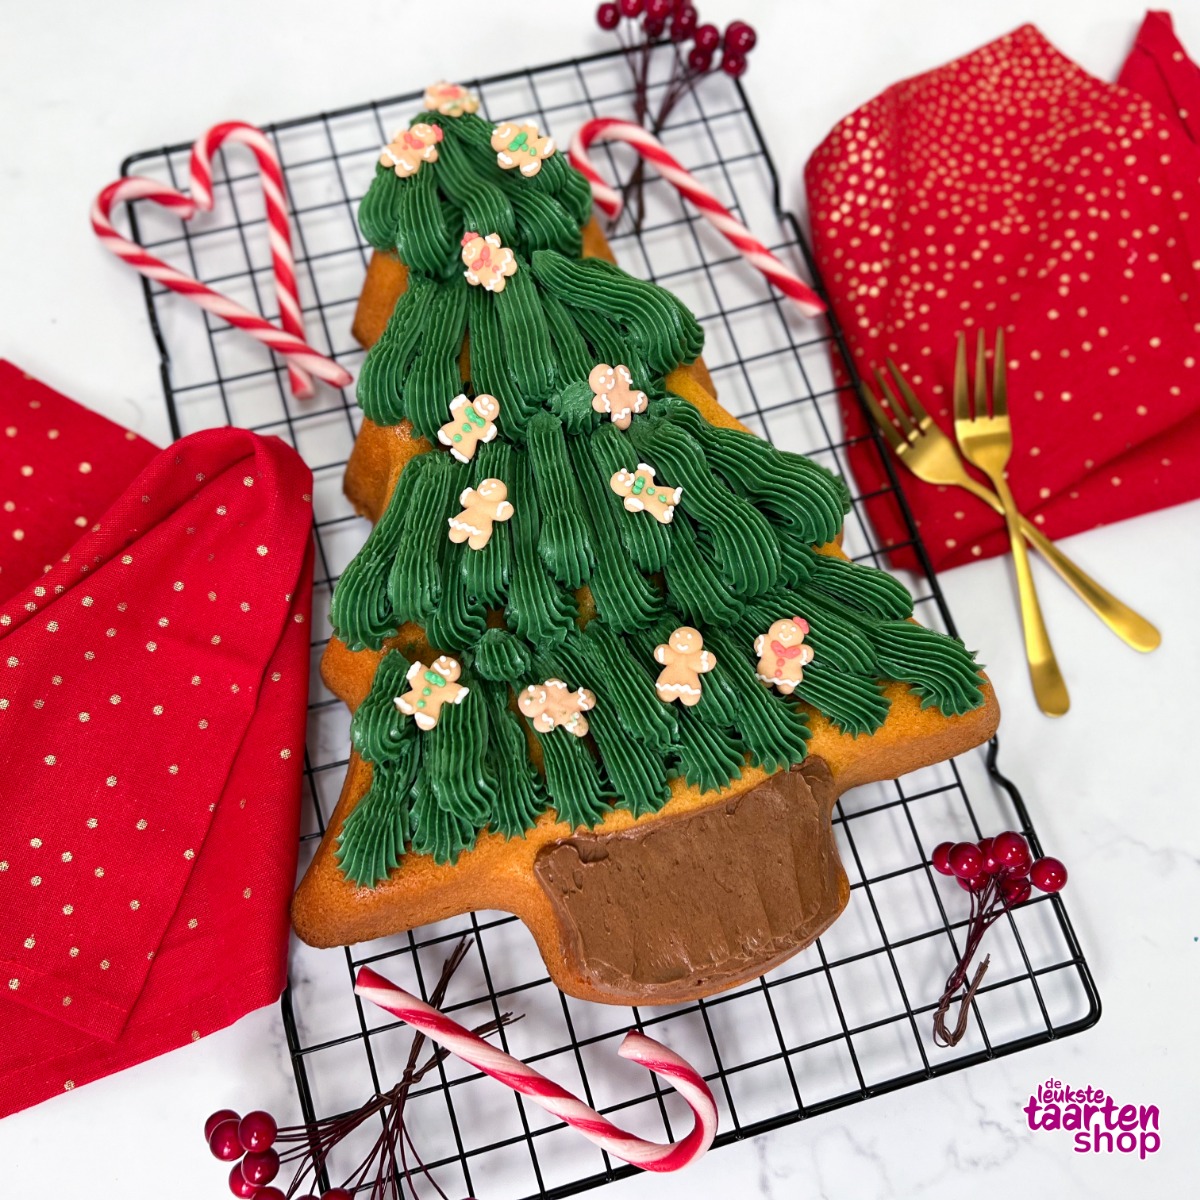 Sugarcraft Creations - Wilton Christmas Tree Cake Pan for hire. 14 x 9 at  furthest points and 2 deep. £10.00 returnable deposit £2.50 for 2 nights  £1.00 per extra night.